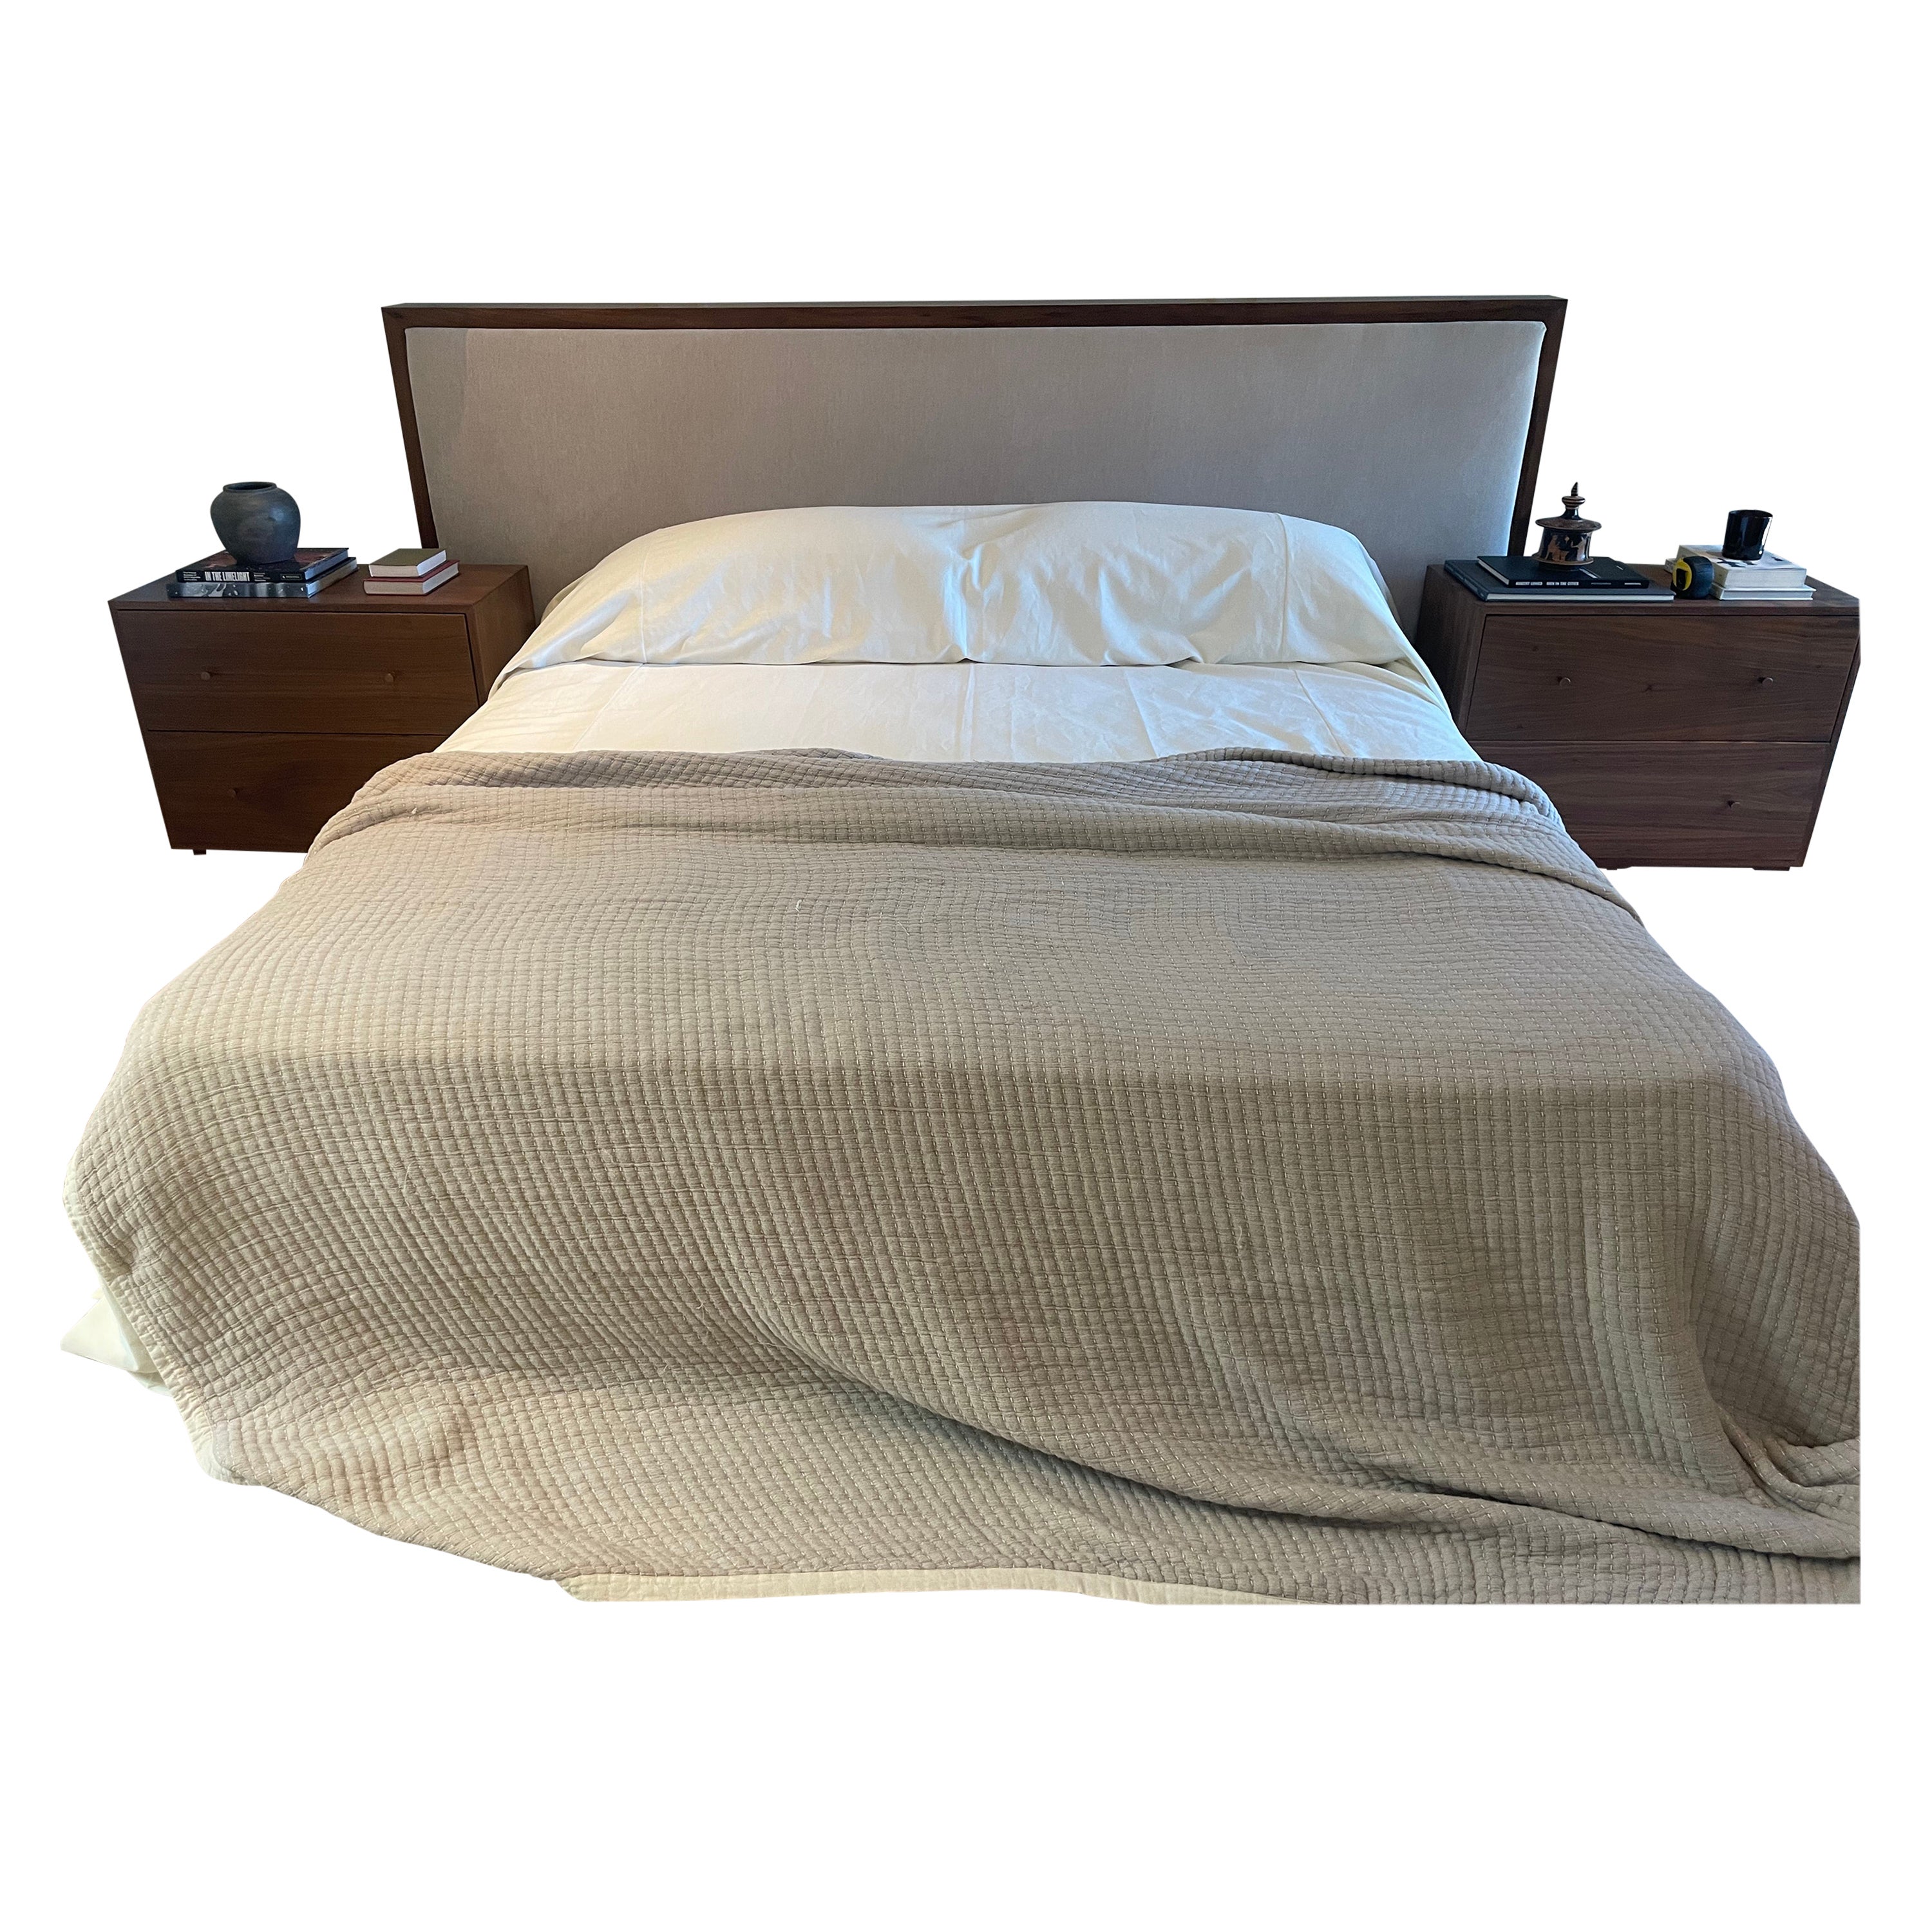 King-Size Bed in Coffee-toned Walnut, Silvered White Mohair Headboard